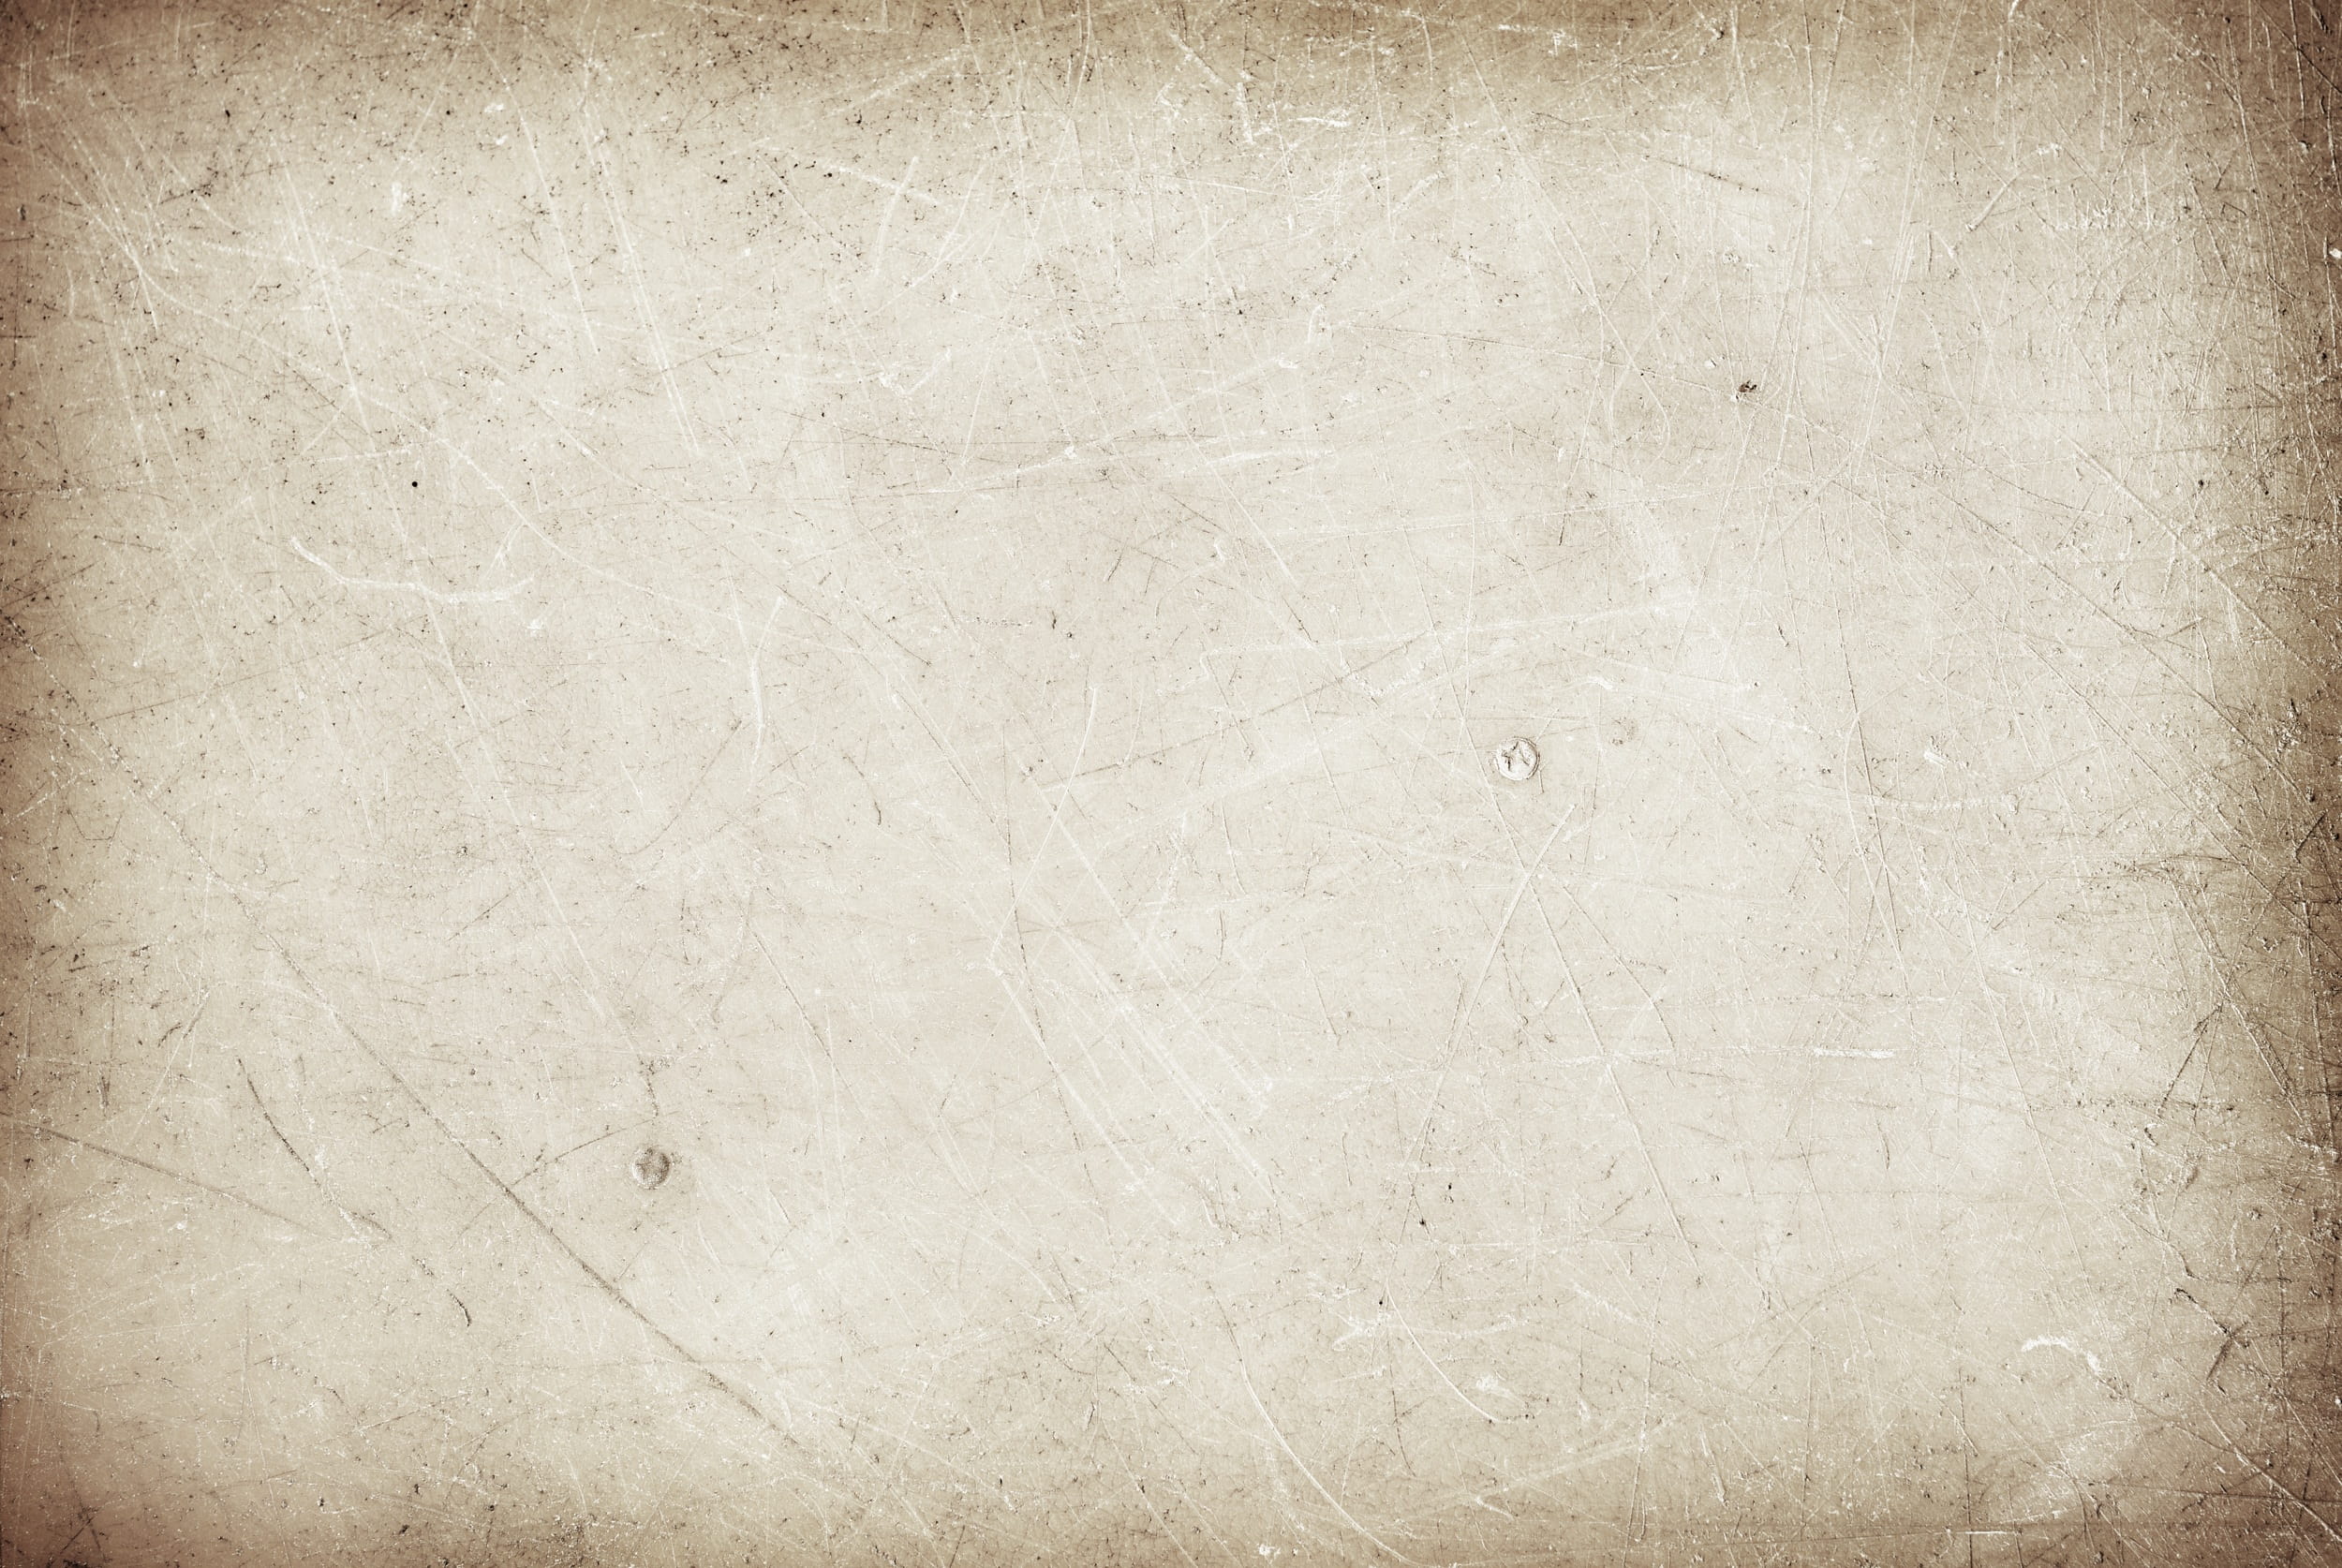 white wall, paper, parchment, old, retro, page, aged, antique